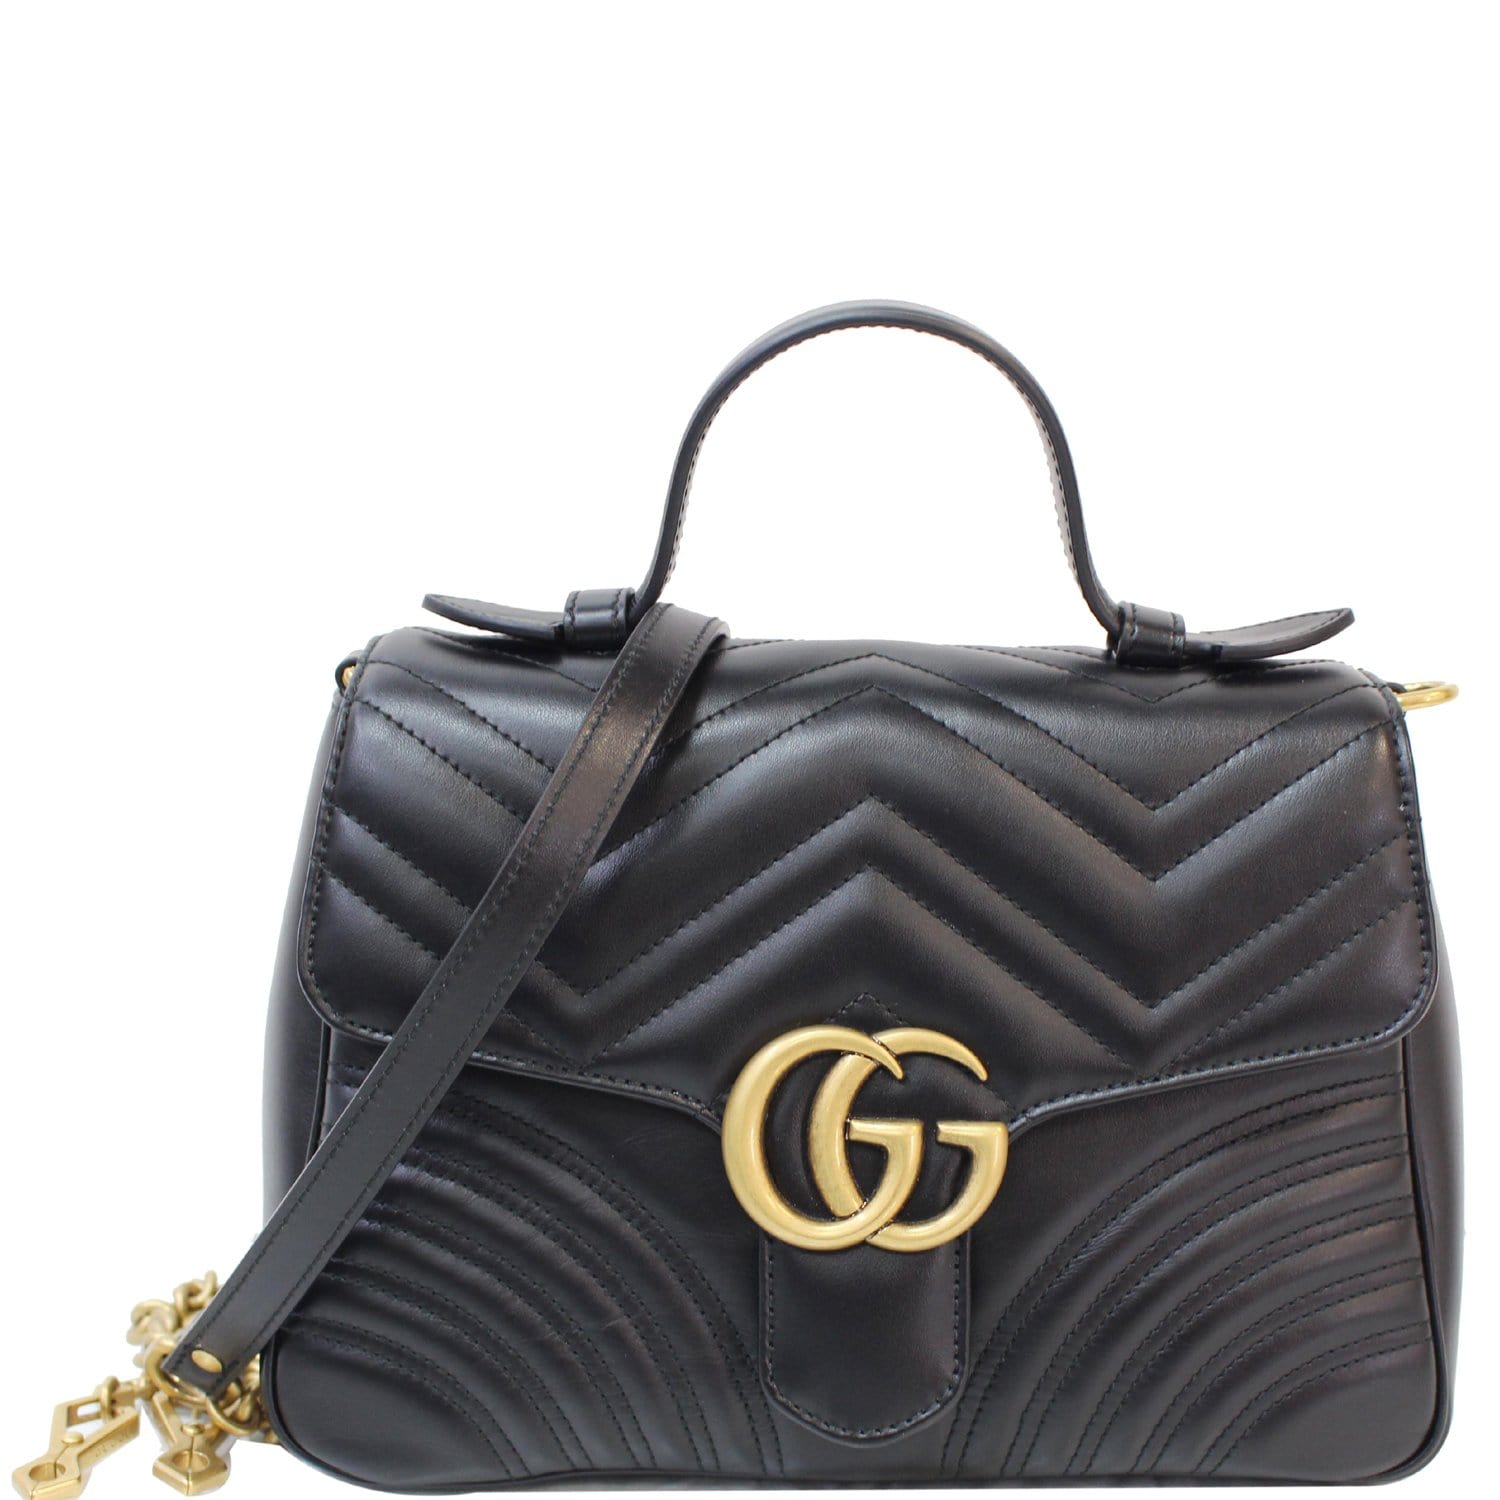 Gucci GG Marmont Top Handle Bag Leather Small Black